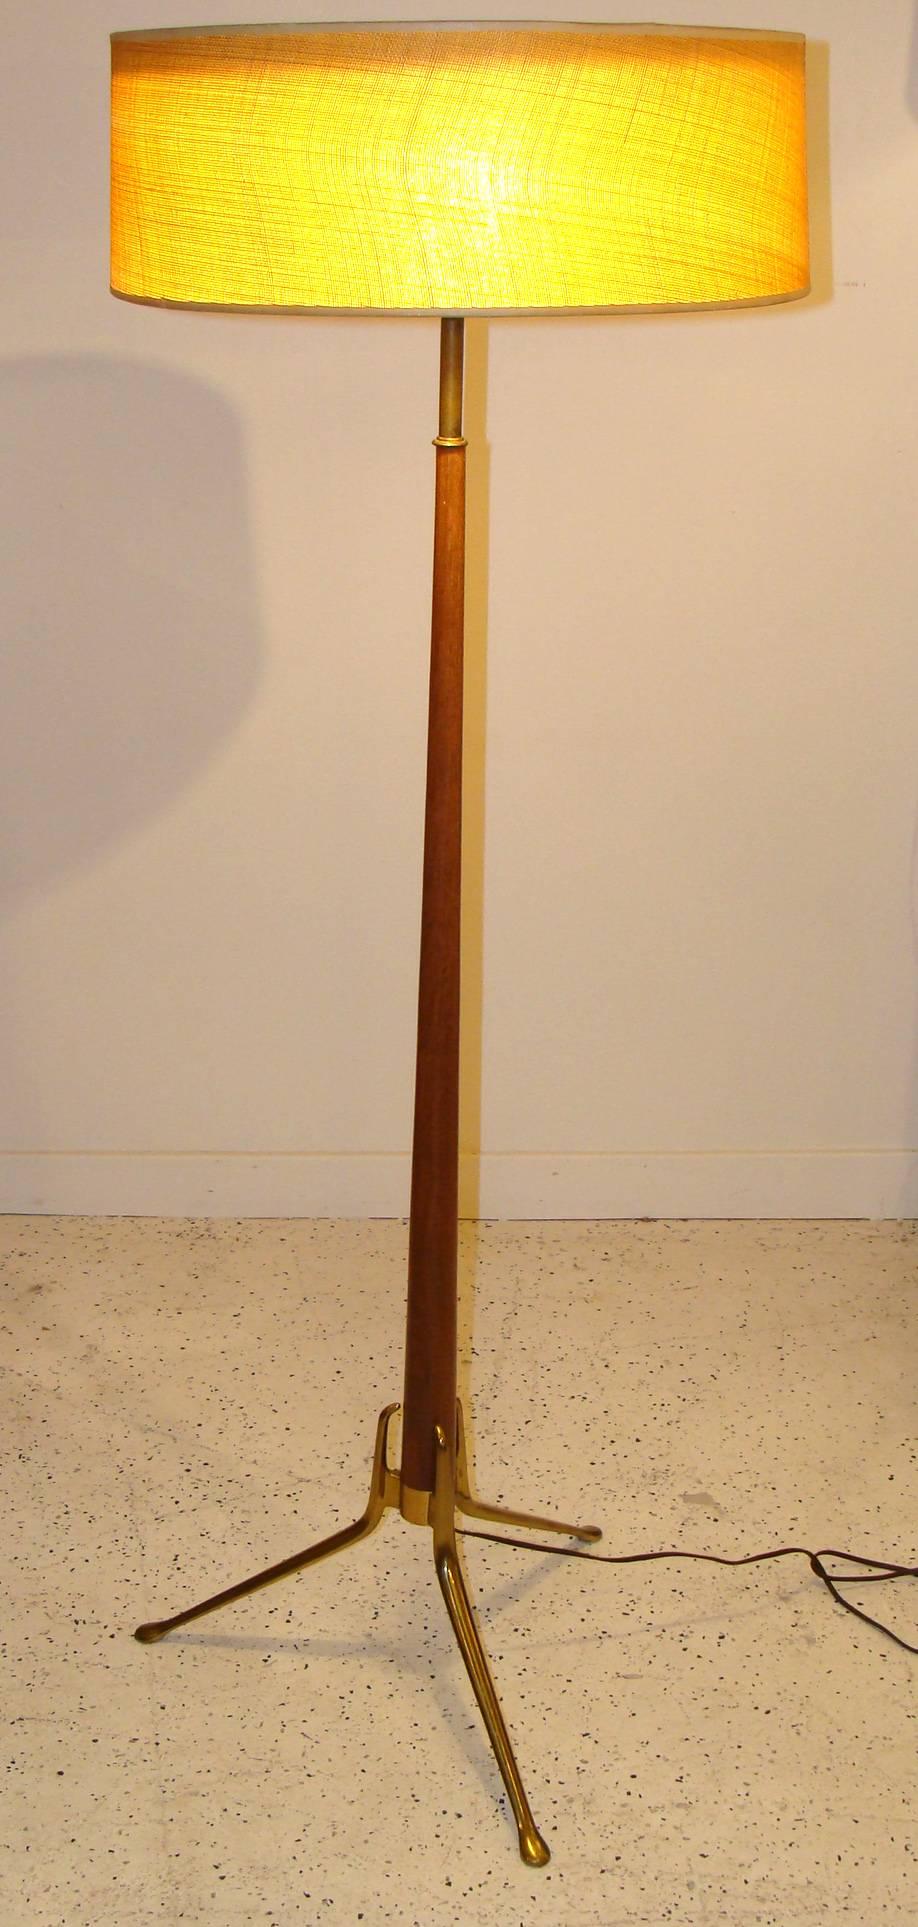 Fab midcentury Lightolier floor lamp in superb original 
condition. Walnut and brass with original diffuser and shade. Takes three standard base light bulbs.